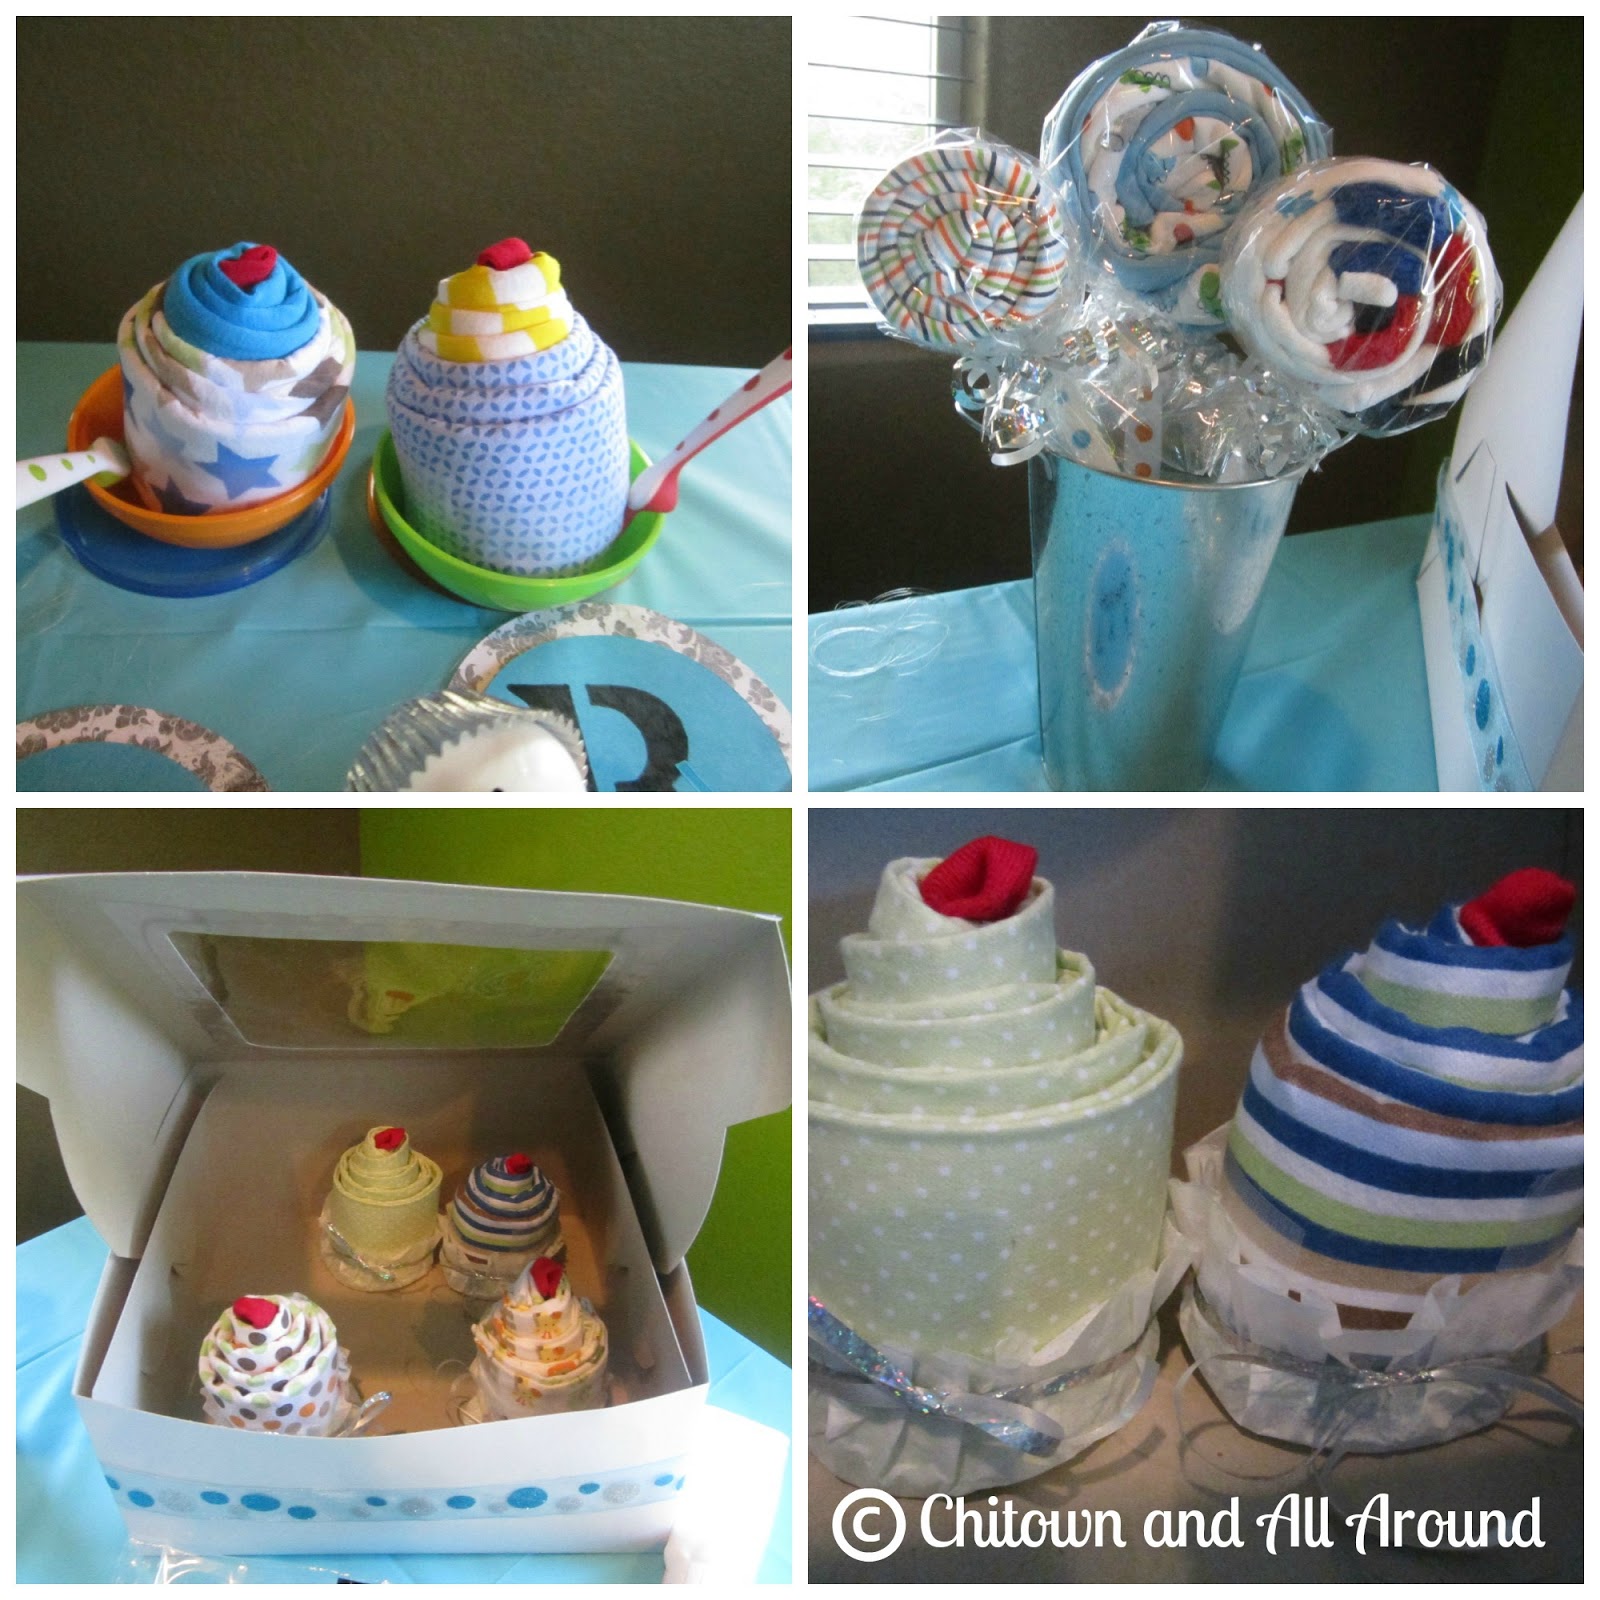 Chitown And All Around: Baby Shower : It's a Boy!